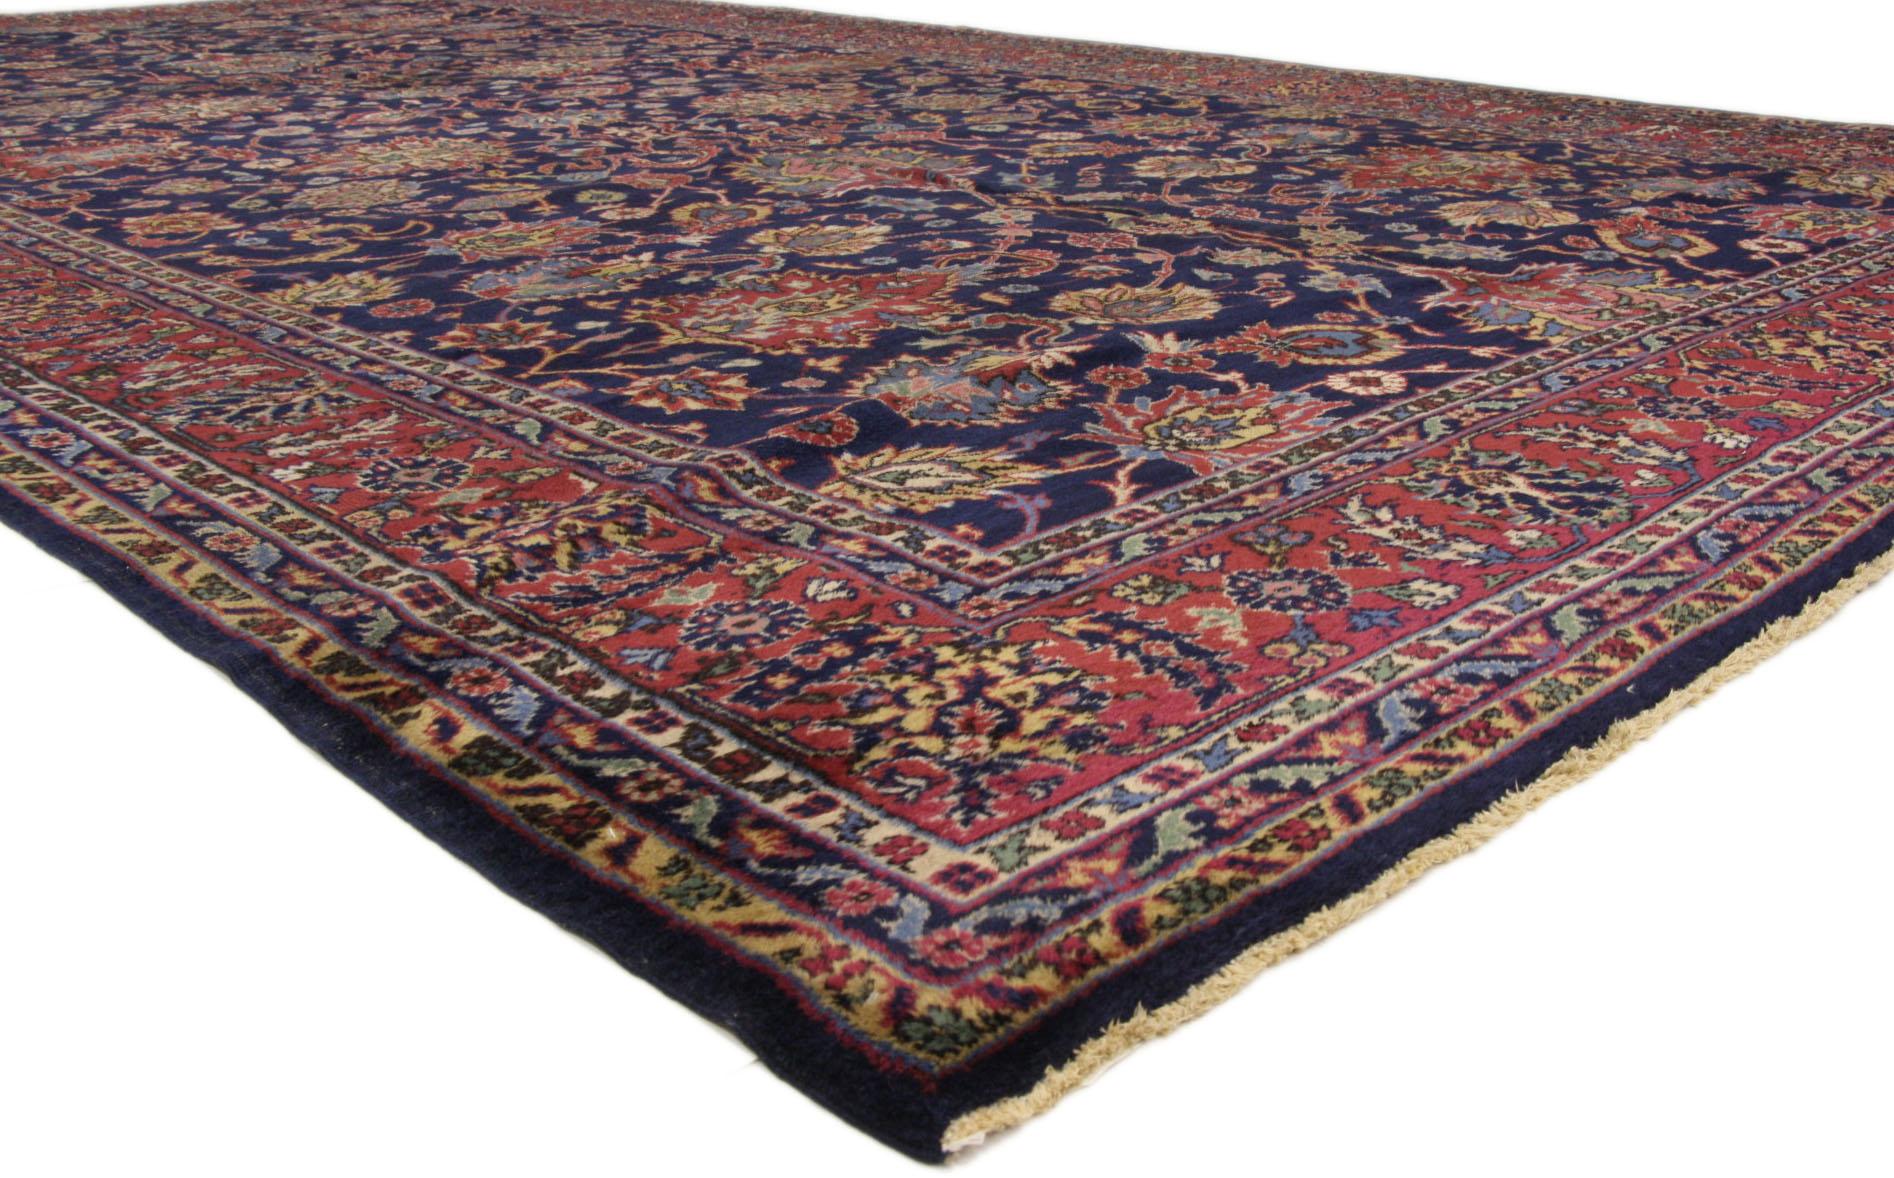 72041 Antique Turkish Sparta Rug with Old World French Chateau Style 09'02 X 16'10. With its beguiling beauty and refined elegance, this hand-knotted wool antique Turkish Sparta rug will take on a curated lived-in look that feels timeless while